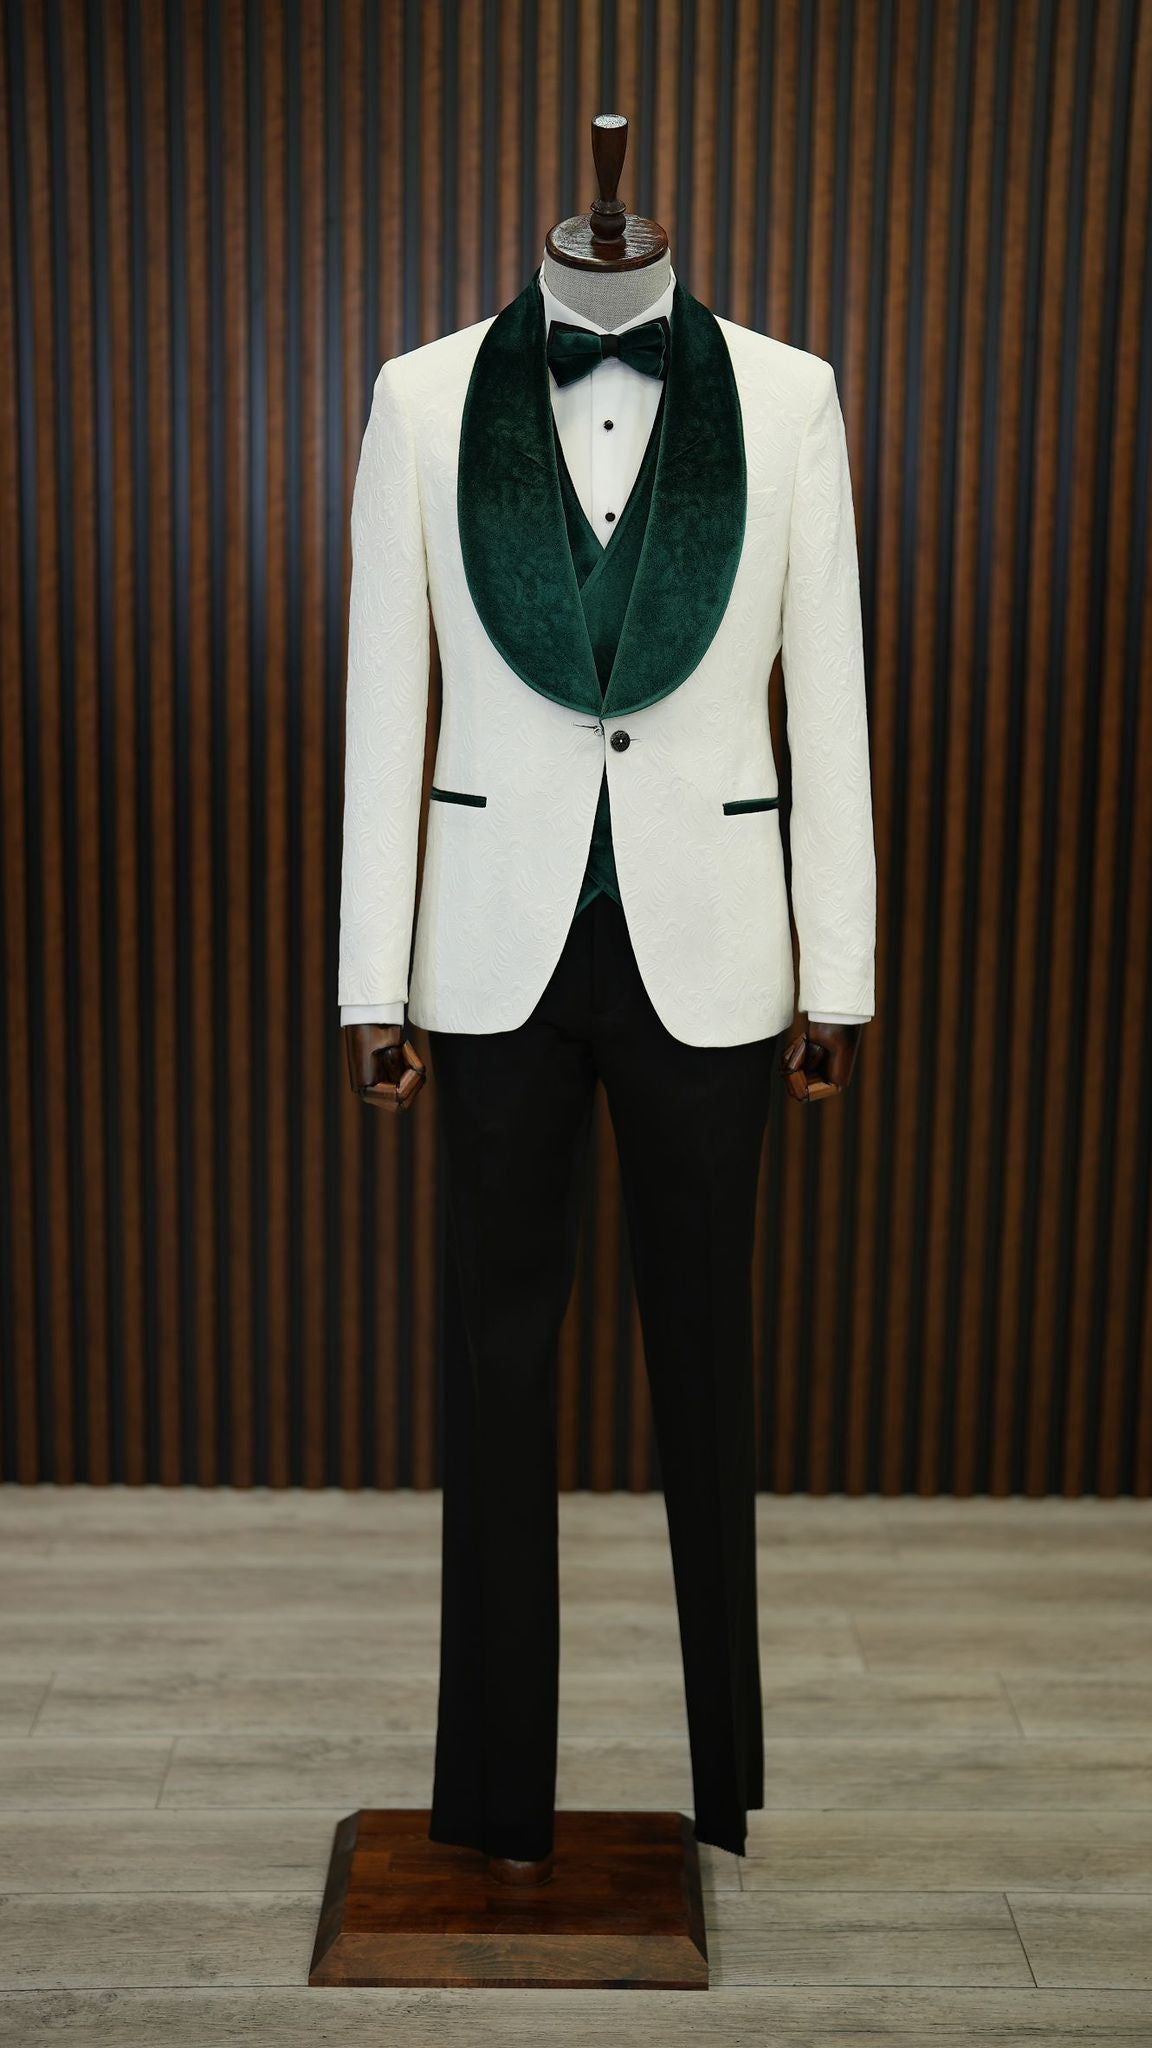 A Green and White Tuxedo Suit on display.